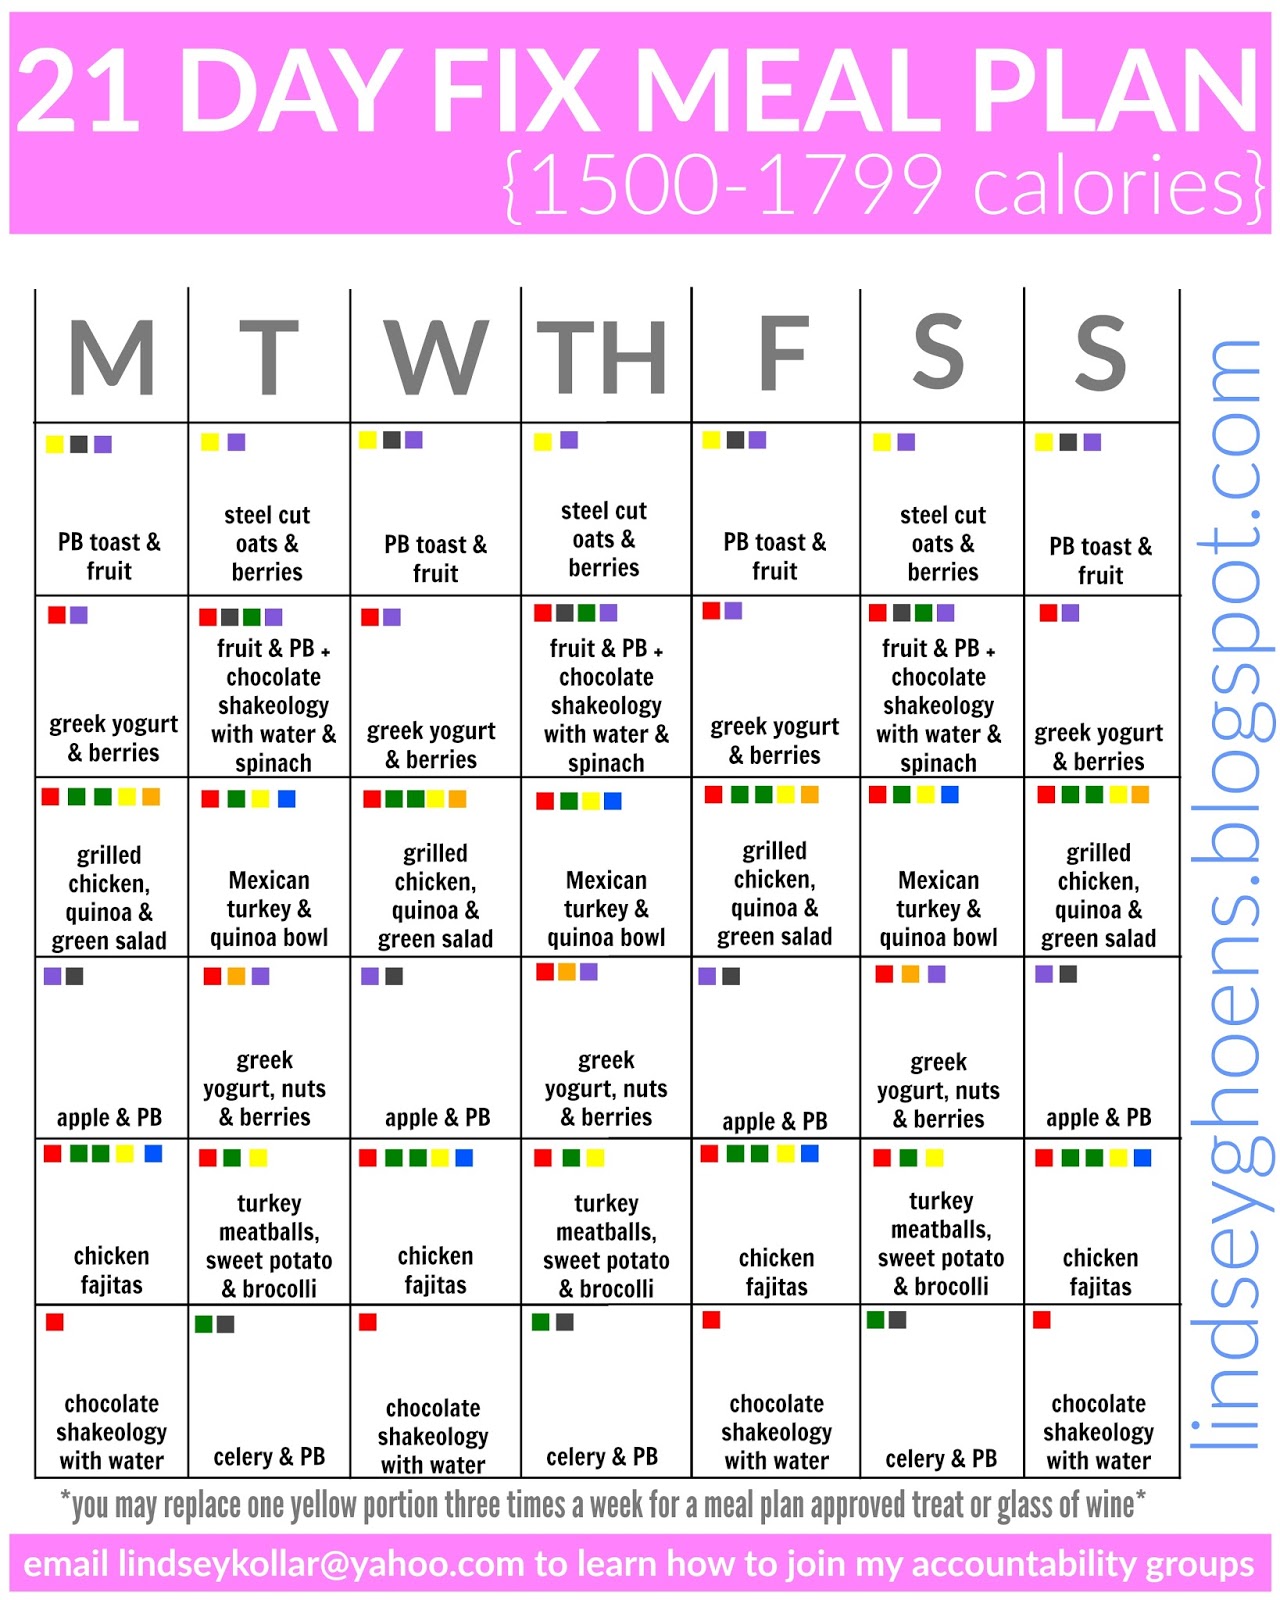 21 Day Fix Meal Plan Printable - Get Your Hands on Amazing Free Printables!